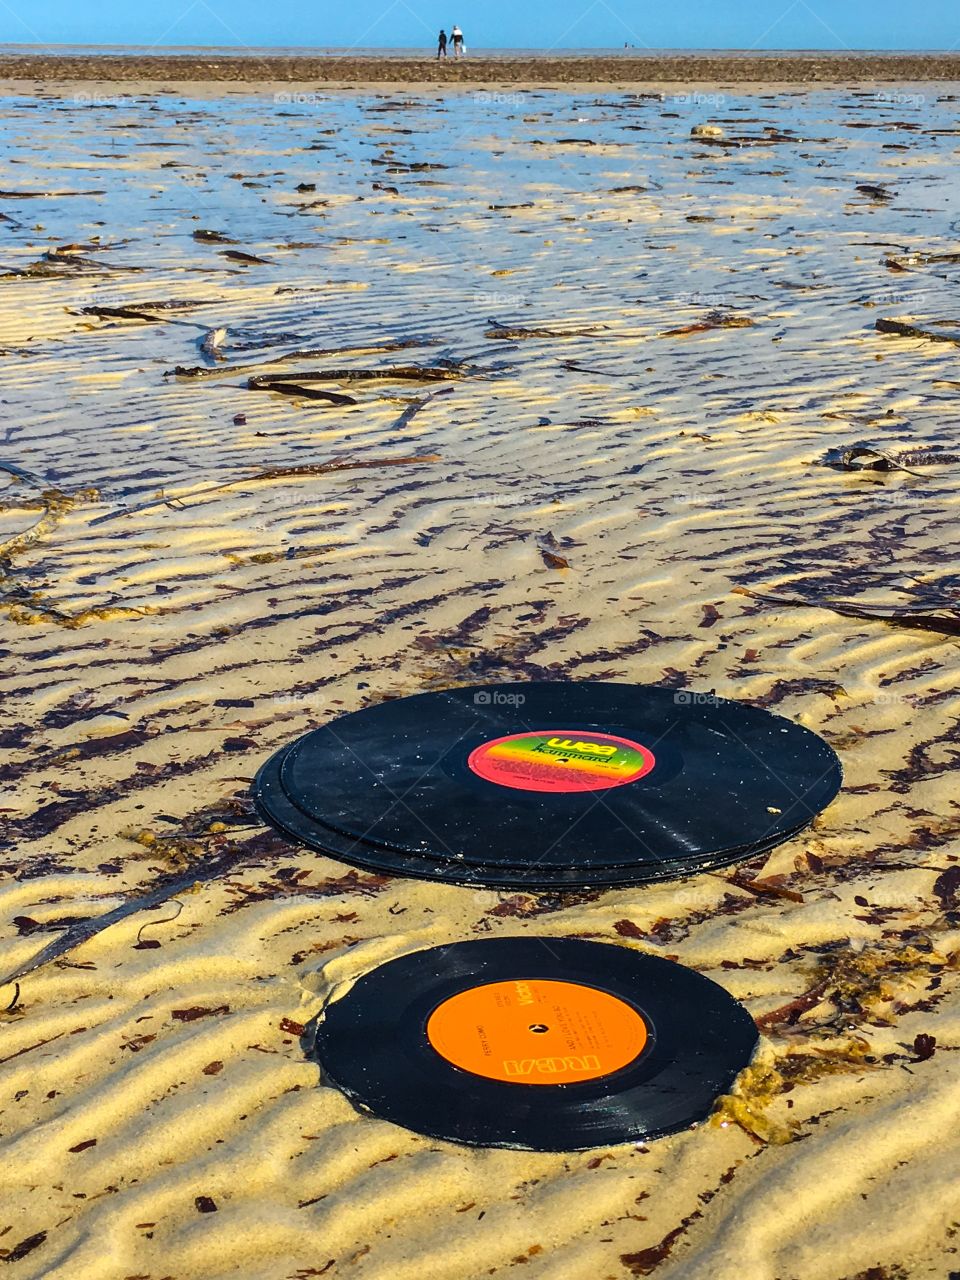 Washed ashore vintage vinyl music records in water surf low tide rippled sand 